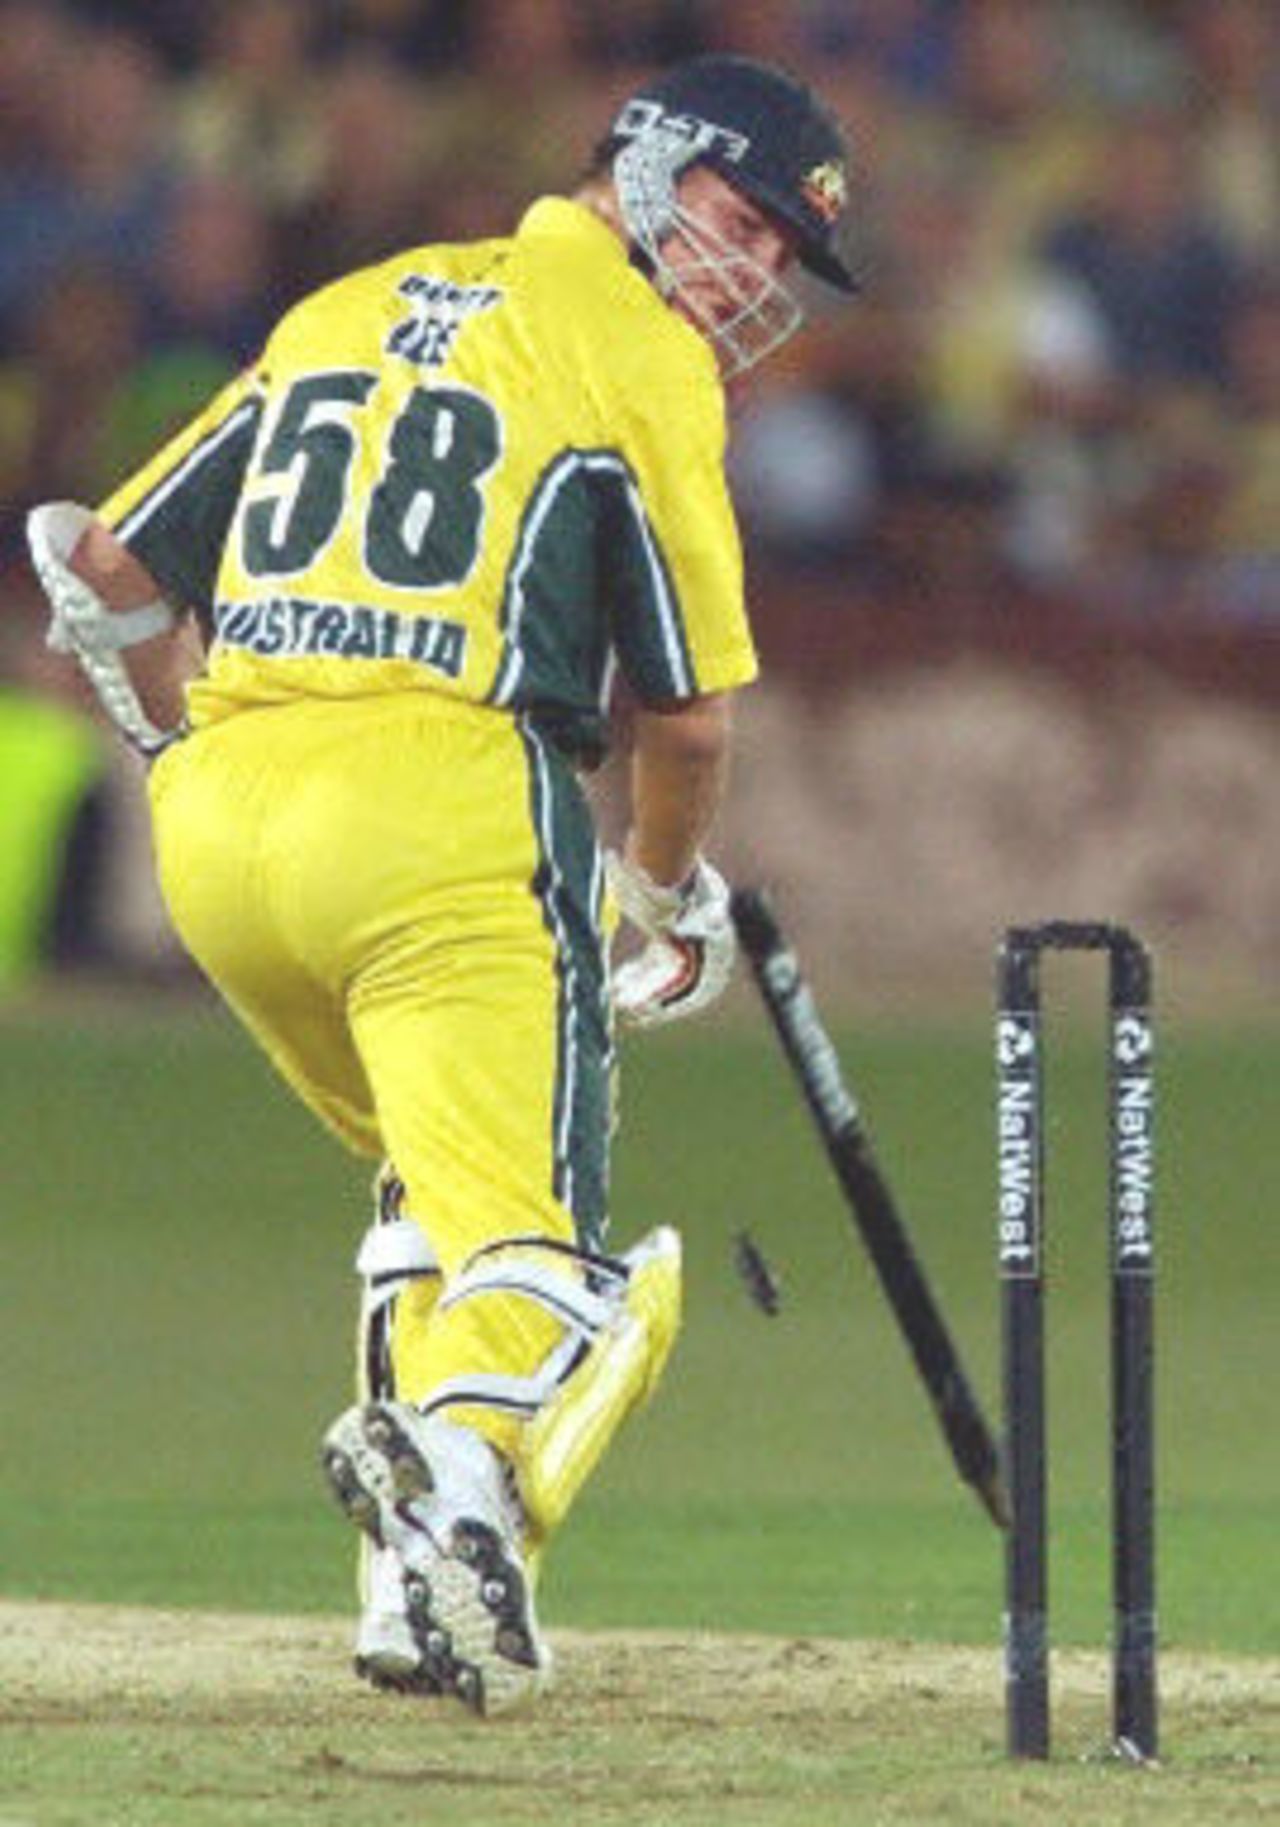 Brett Lee looks back at his stump cartwheeling after being knocked out of the ground by Waqar Younis, 8th ODI at Trent Bridge, 19 June 2001.